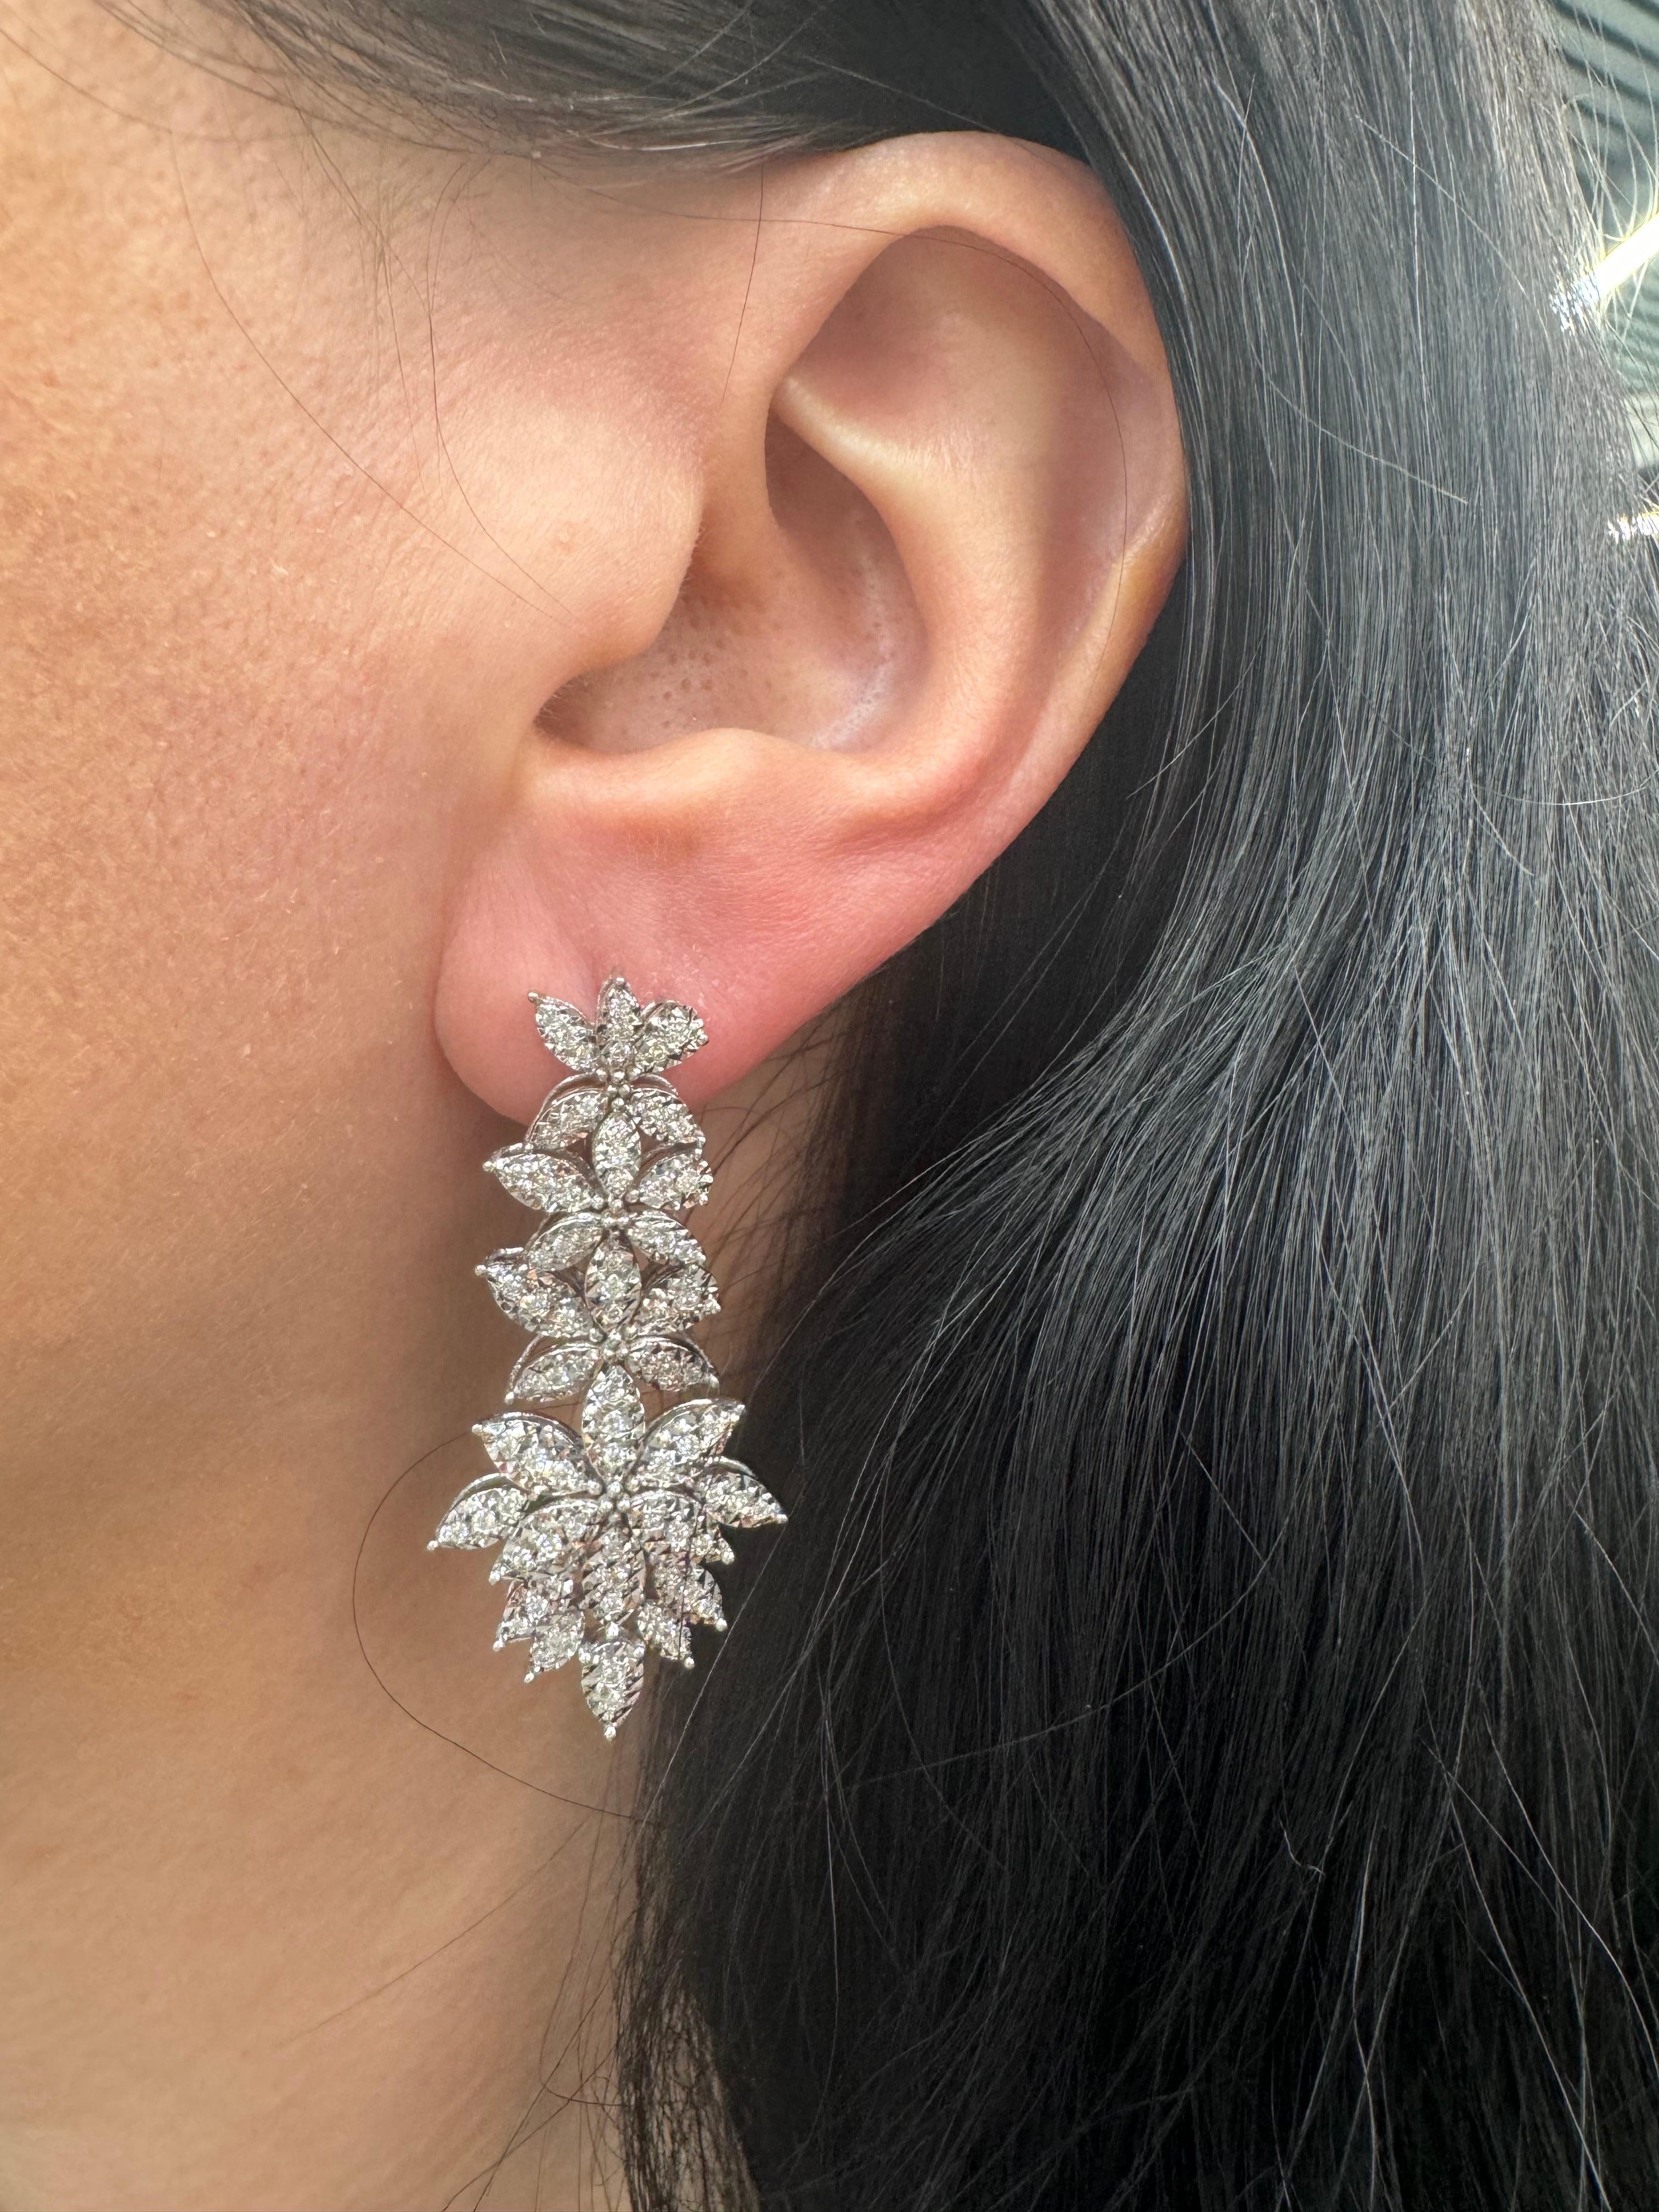 Floral cluster drop earrings featuring 166 round brilliants weighing 0.86 carats in 14 karat white gold.
Color F-G
Clarity VS1-VS2

Big look!! 